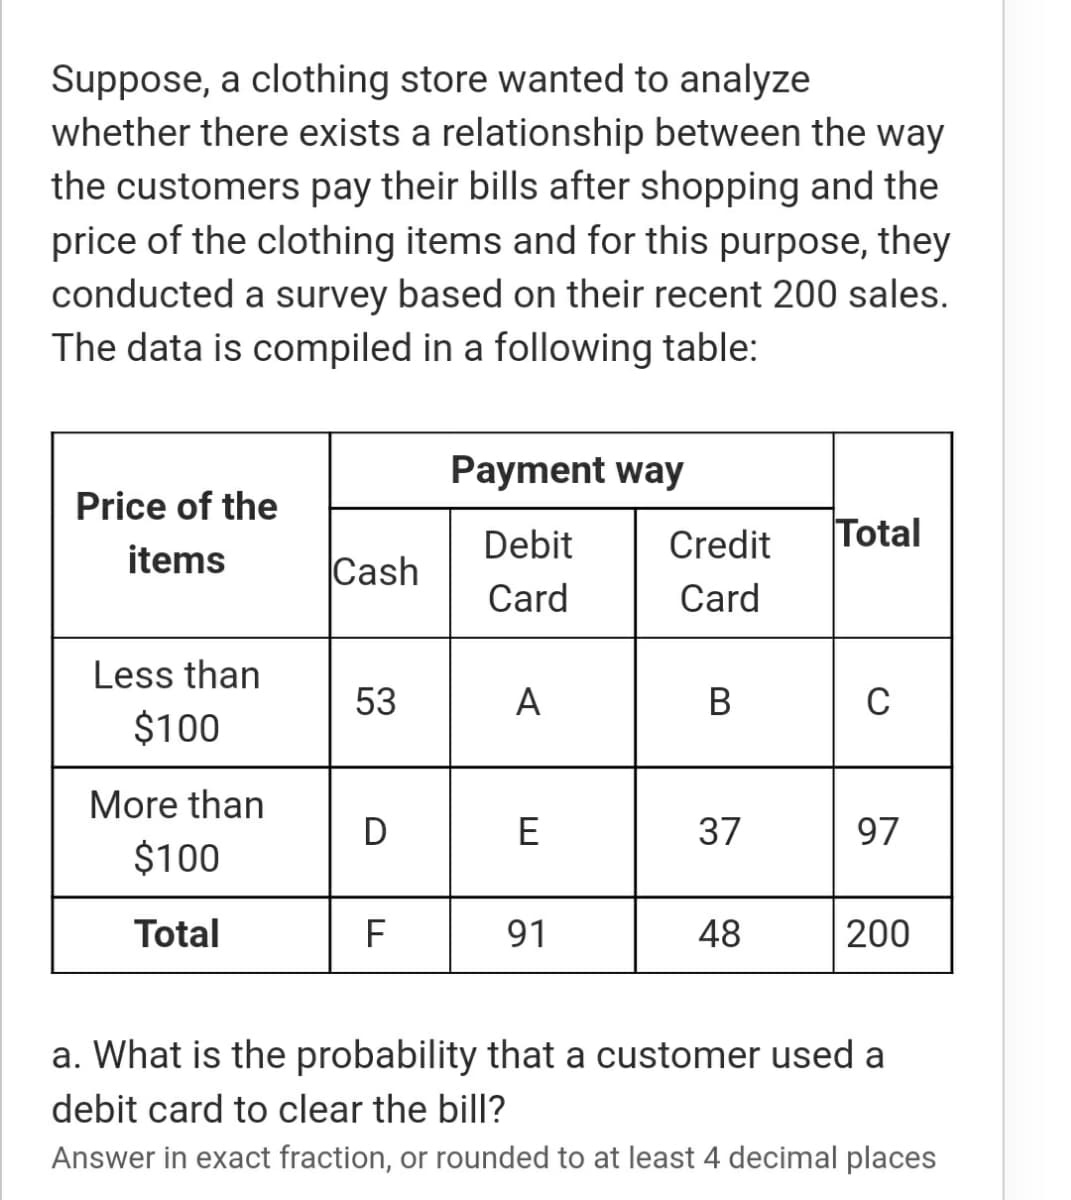 Suppose, a clothing store wanted to analyze
whether there exists a relationship between the way
the customers pay their bills after shopping and the
price of the clothing items and for this purpose, they
conducted a survey based on their recent 200 sales.
The data is compiled in a following table:
Payment way
Price of the
Debit
Credit
Total
items
Cash
Card
Card
Less than
53
А
В
C
$100
More than
D
E
37
97
$100
Total
F
91
48
200
a. What is the probability that a customer used a
debit card to clear the bill?
Answer in exact fraction, or rounded to at least 4 decimal places
